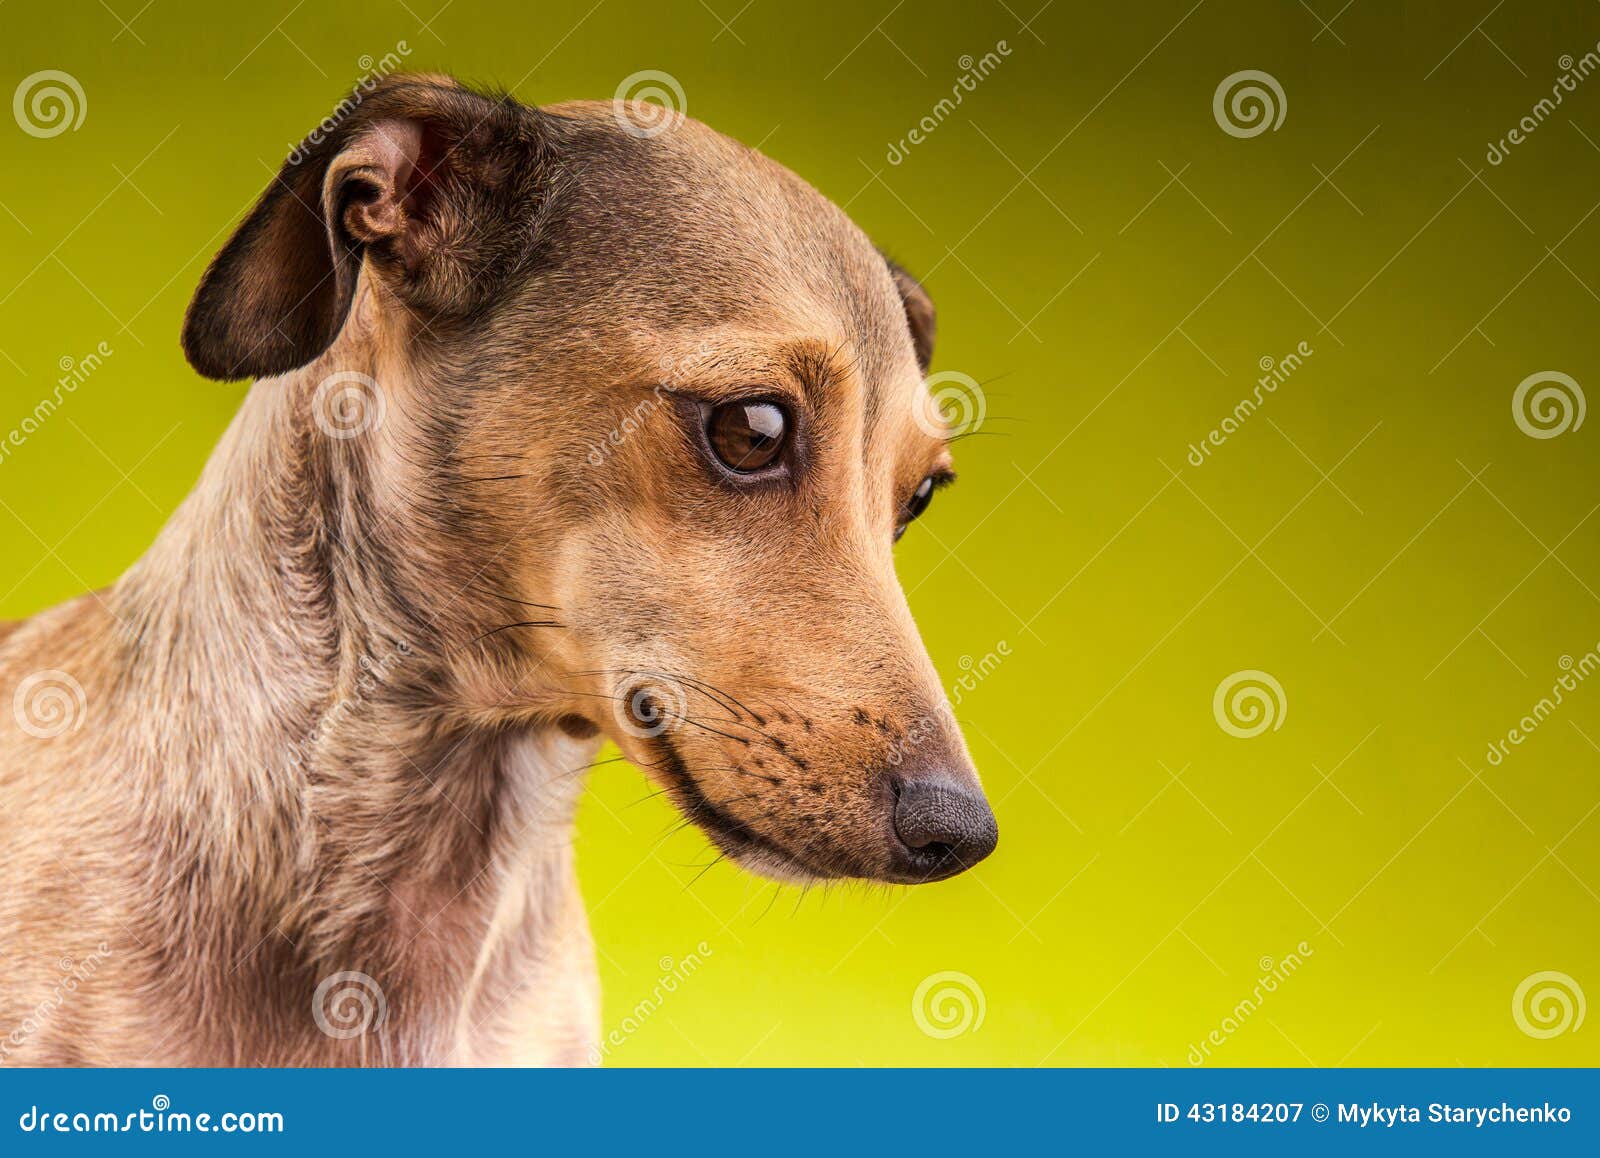 Small Brown Short Hair Dachshund Dog Stock Image Image Of